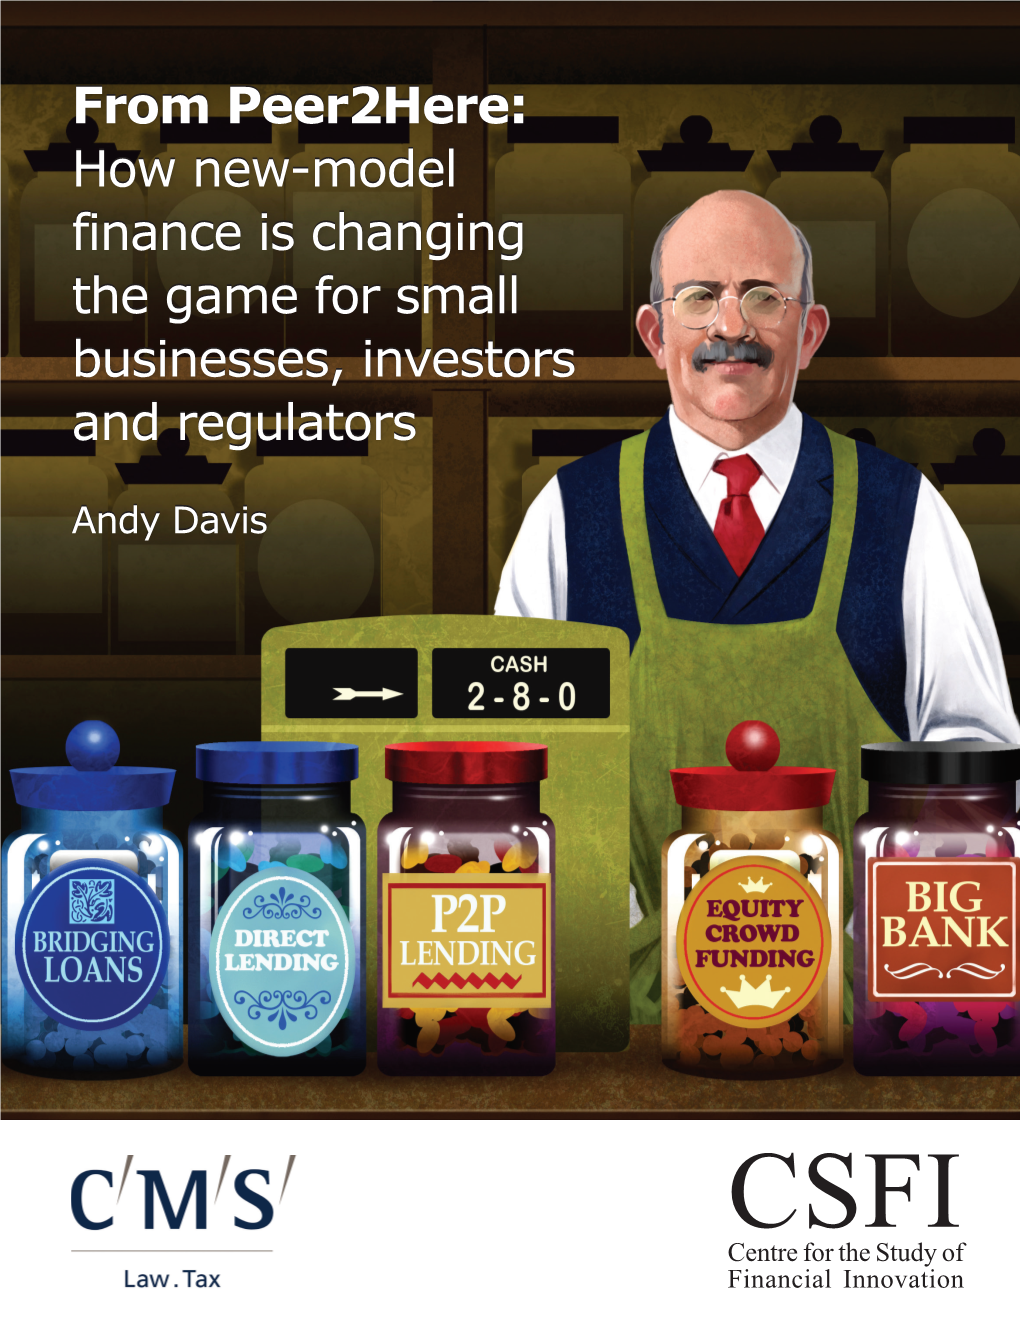 From Peer2here: How New-Model Finance Is Changing the Game for Small Businesses, Investors and Regulators